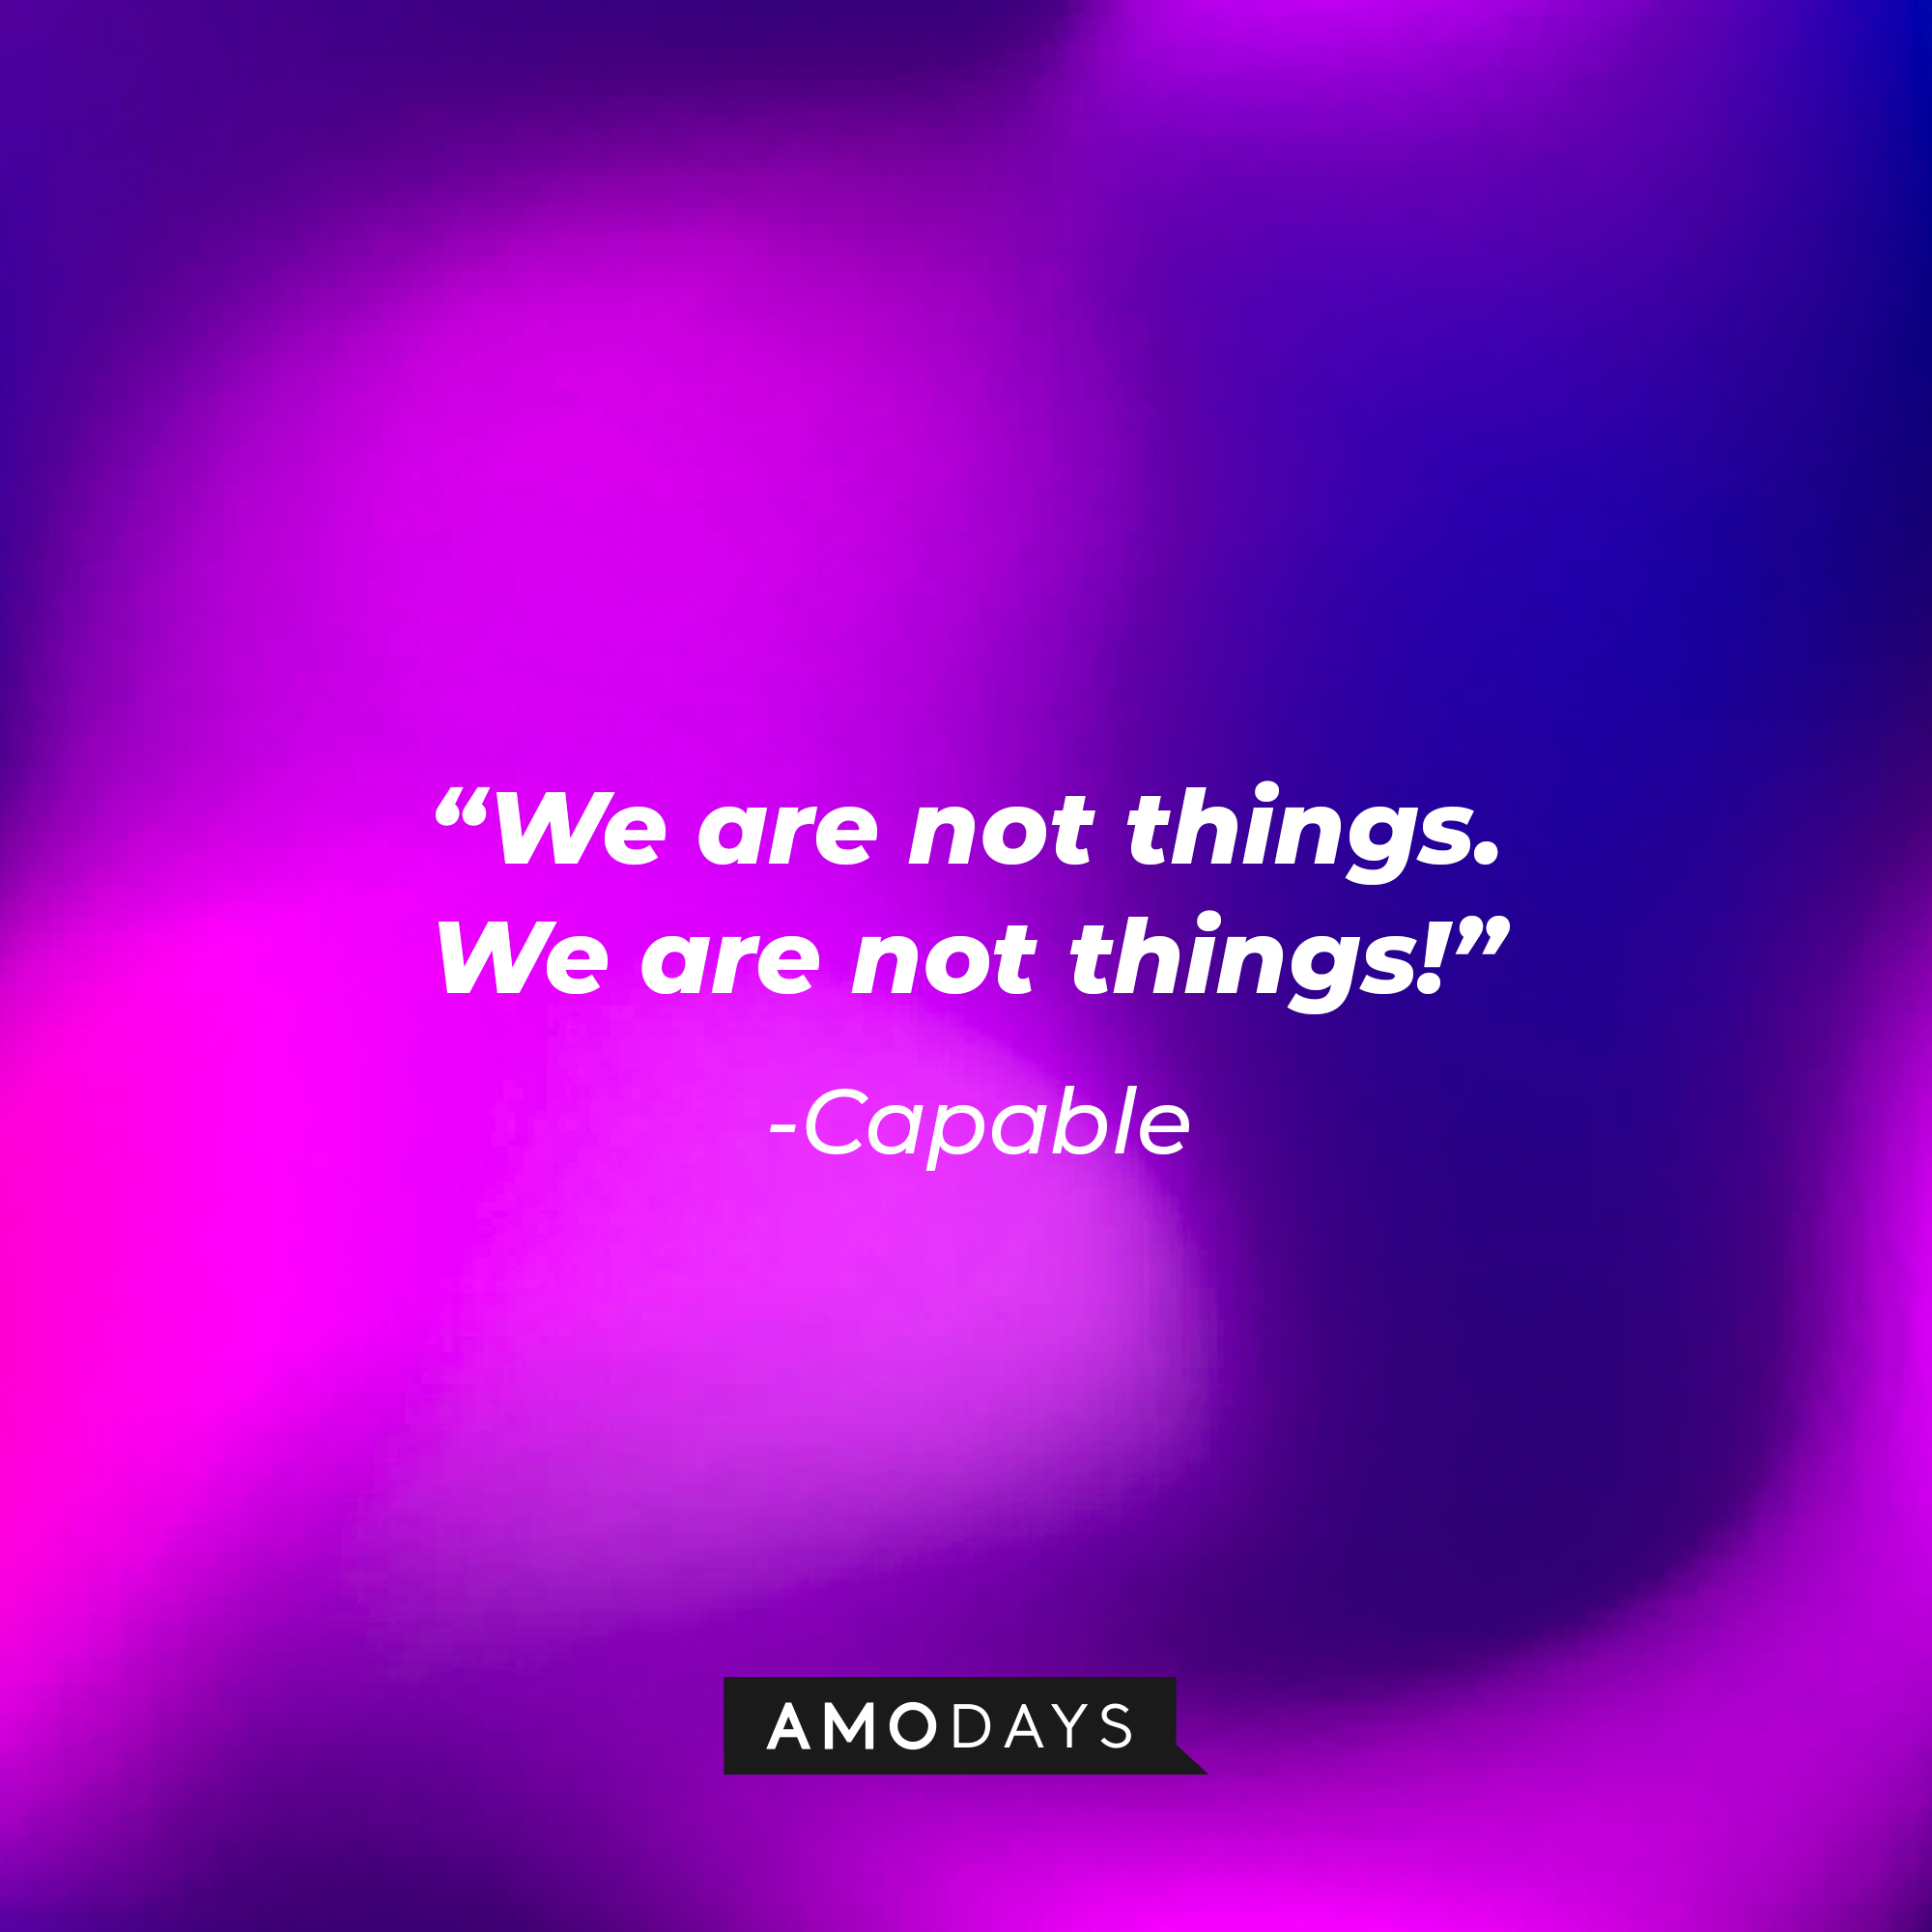 Capable’s quote: "We are not things. We are not things!" | Source: AmoDays